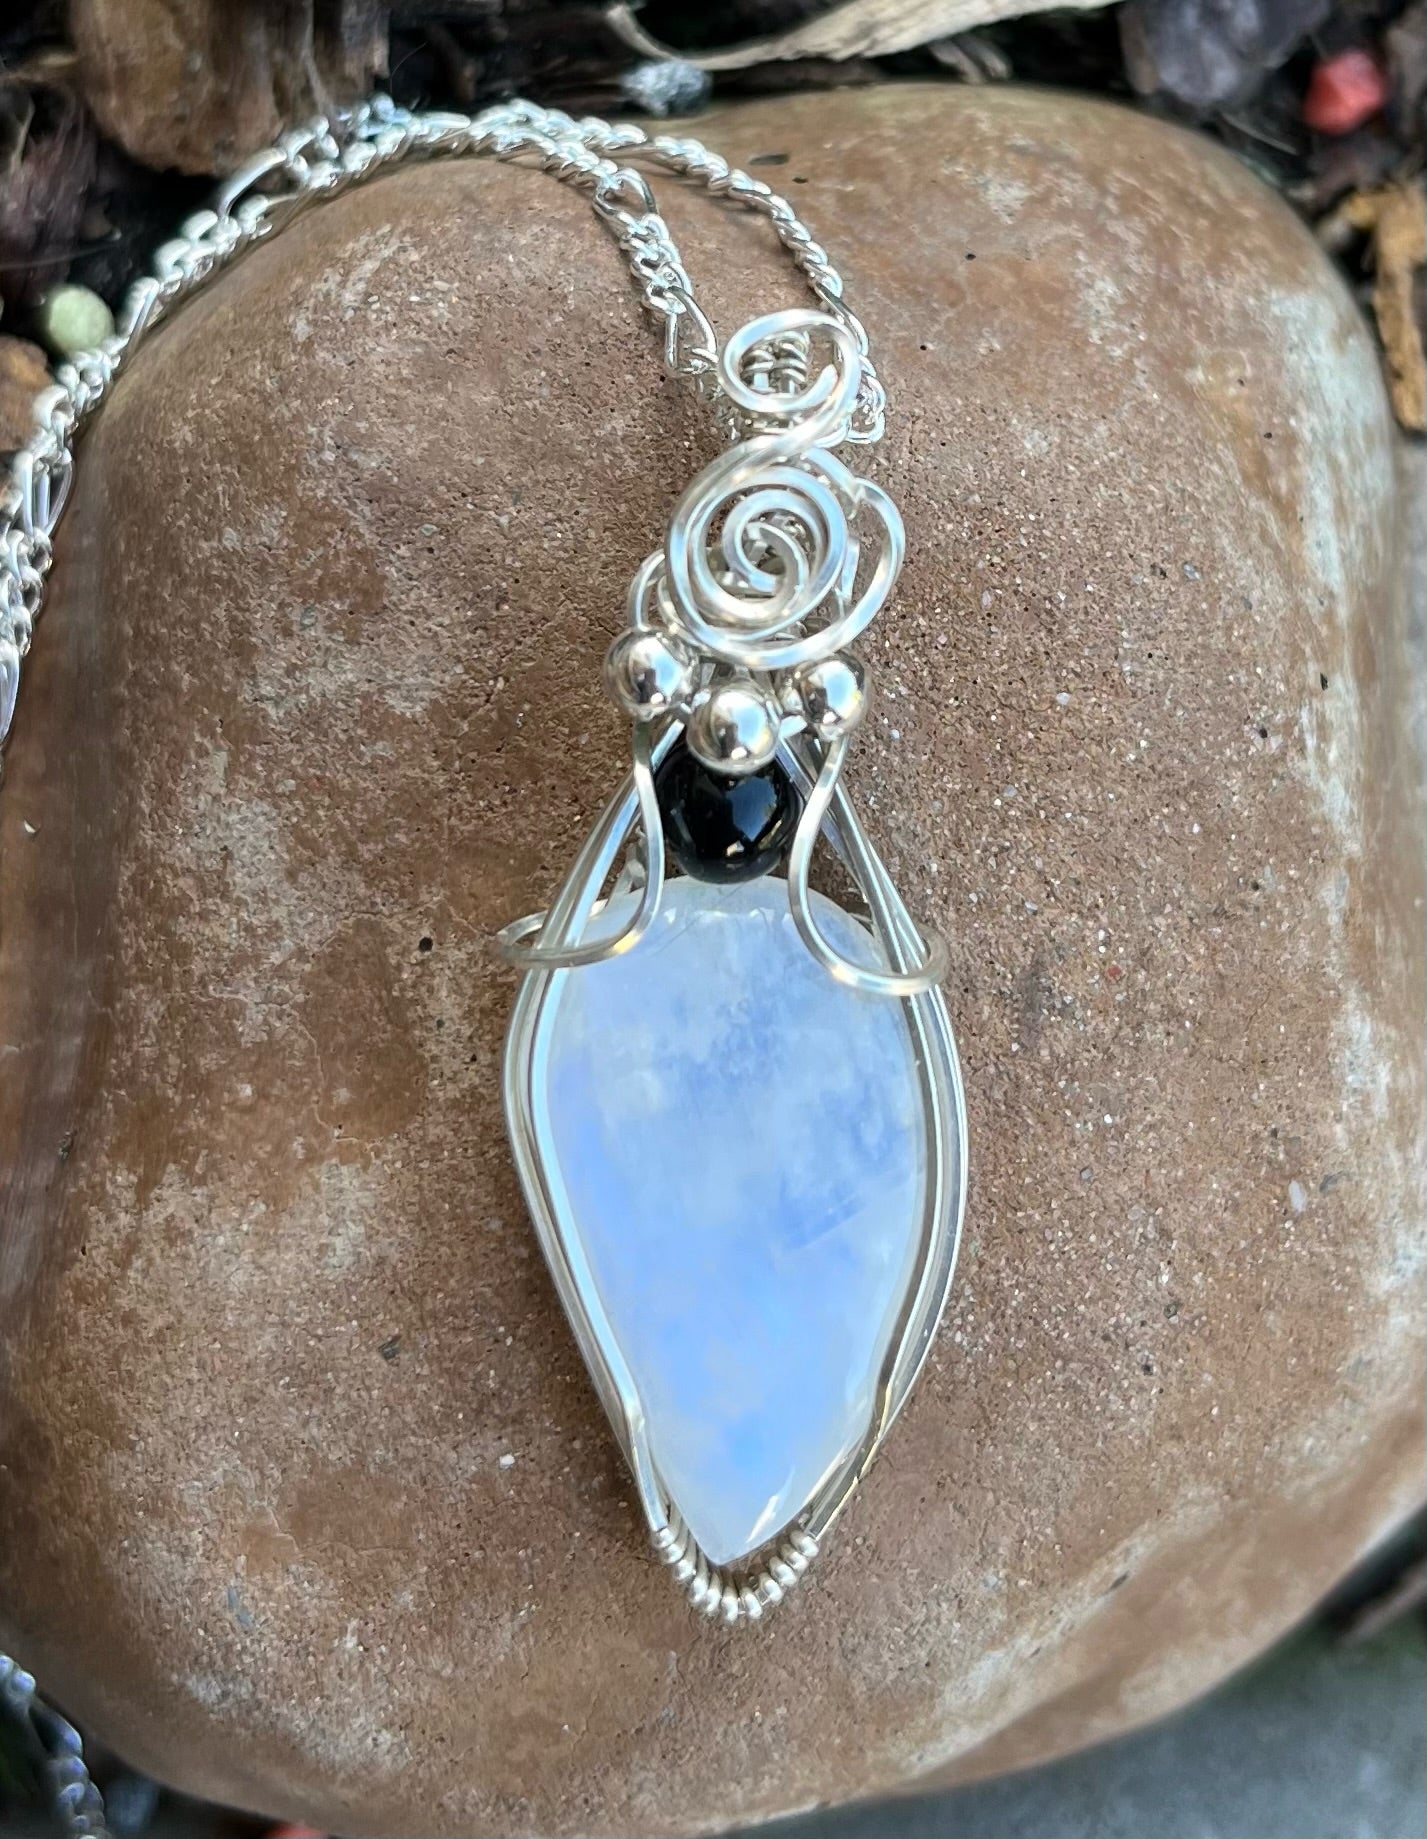 Irregularly Shaped Moonstone With Silver And Black Beads